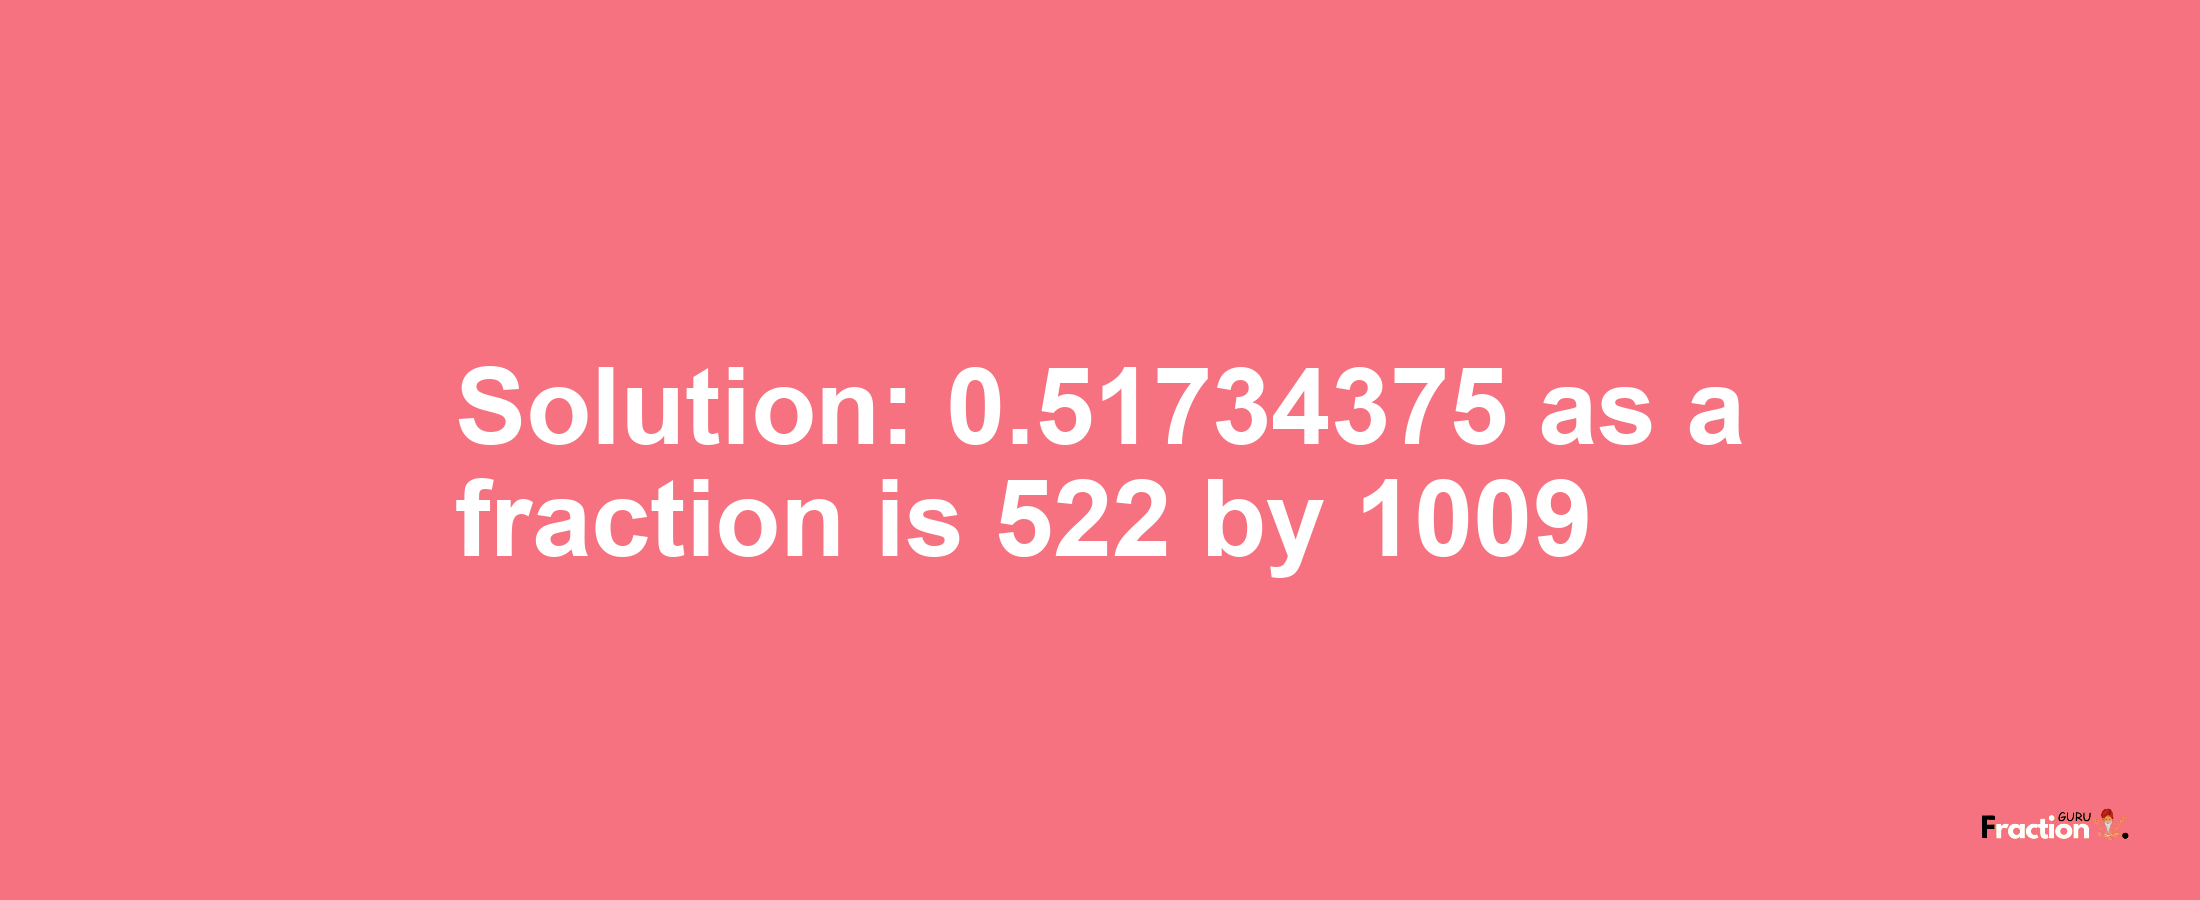 Solution:0.51734375 as a fraction is 522/1009